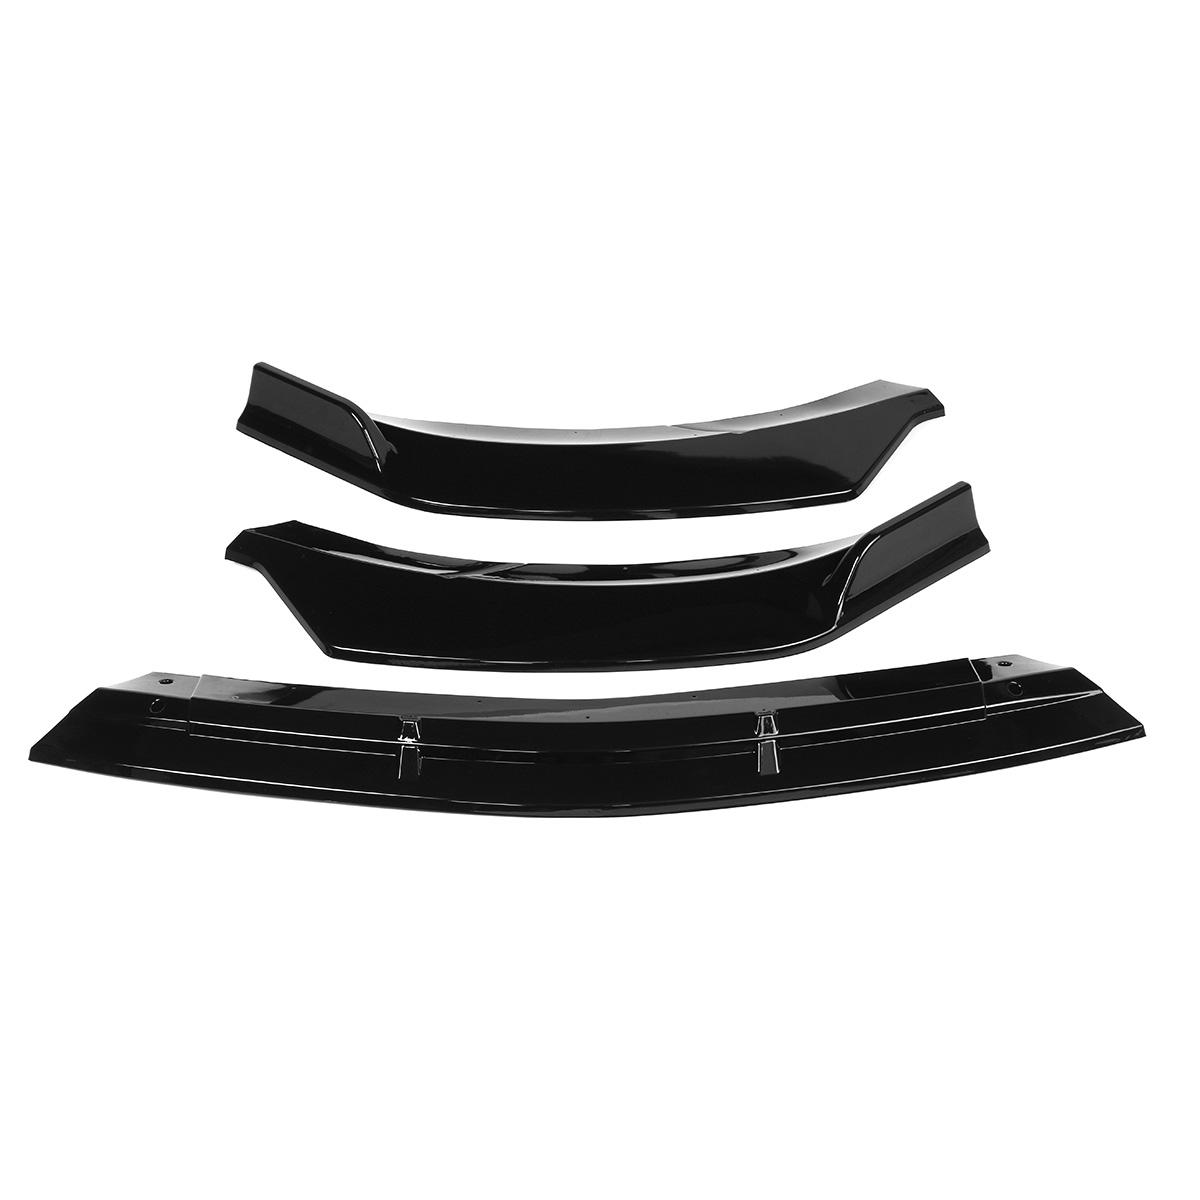 3Pcs Glossy Black Front Bumper Protector Lip Spoiler Covers Trim For Mercedes Benz CLA-Class W117 20